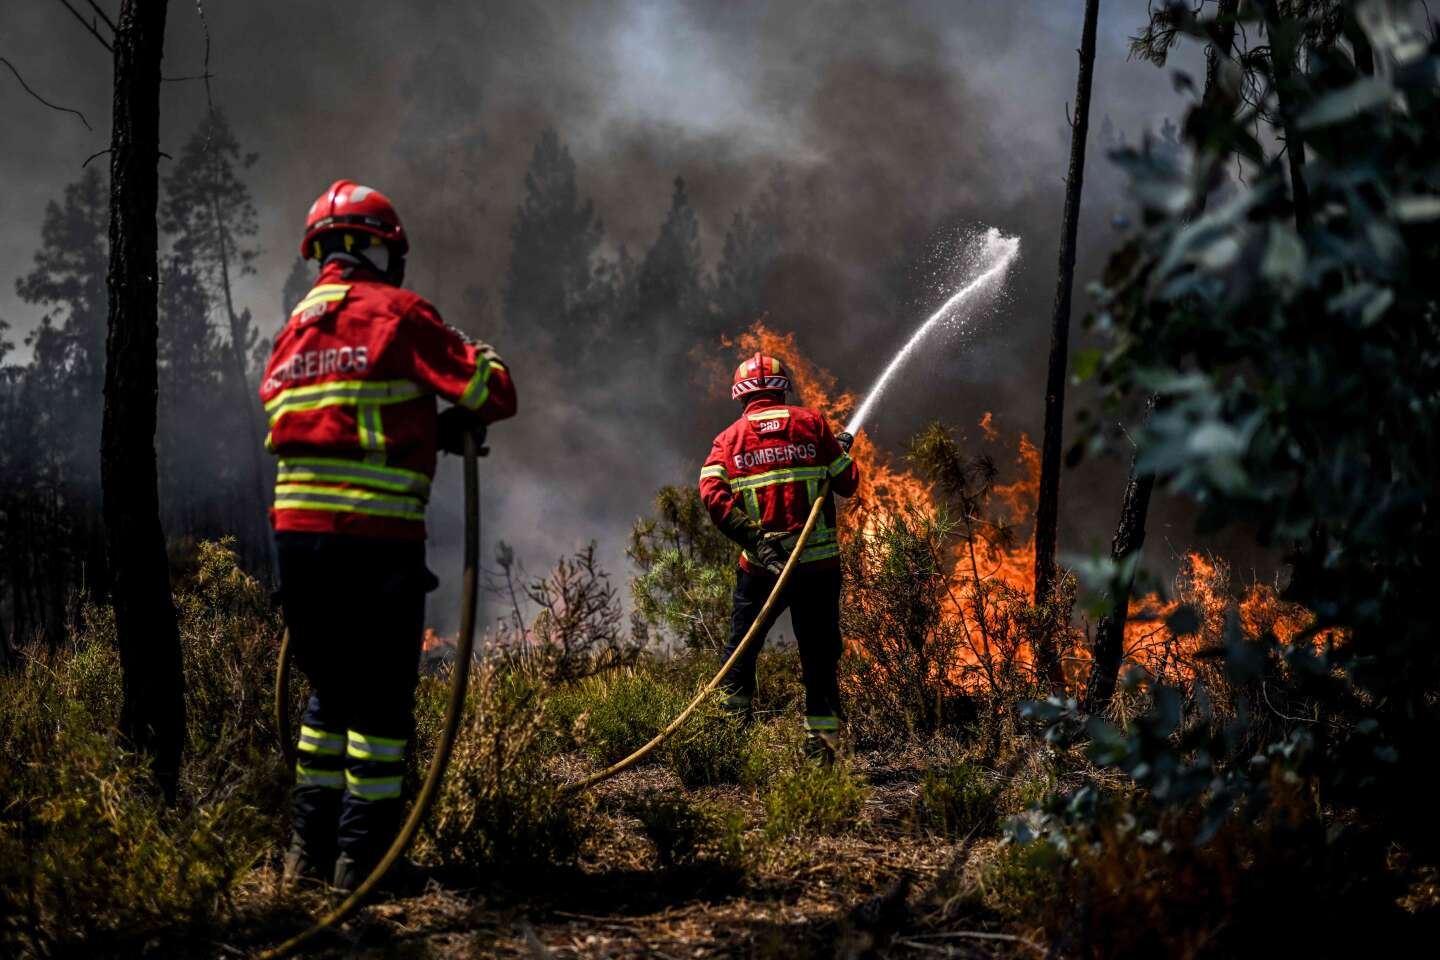 In Portugal, about 3,200 firefighters are still on hand to fight forest fires, including nearly 10,000 hectares of forest that have been destroyed.